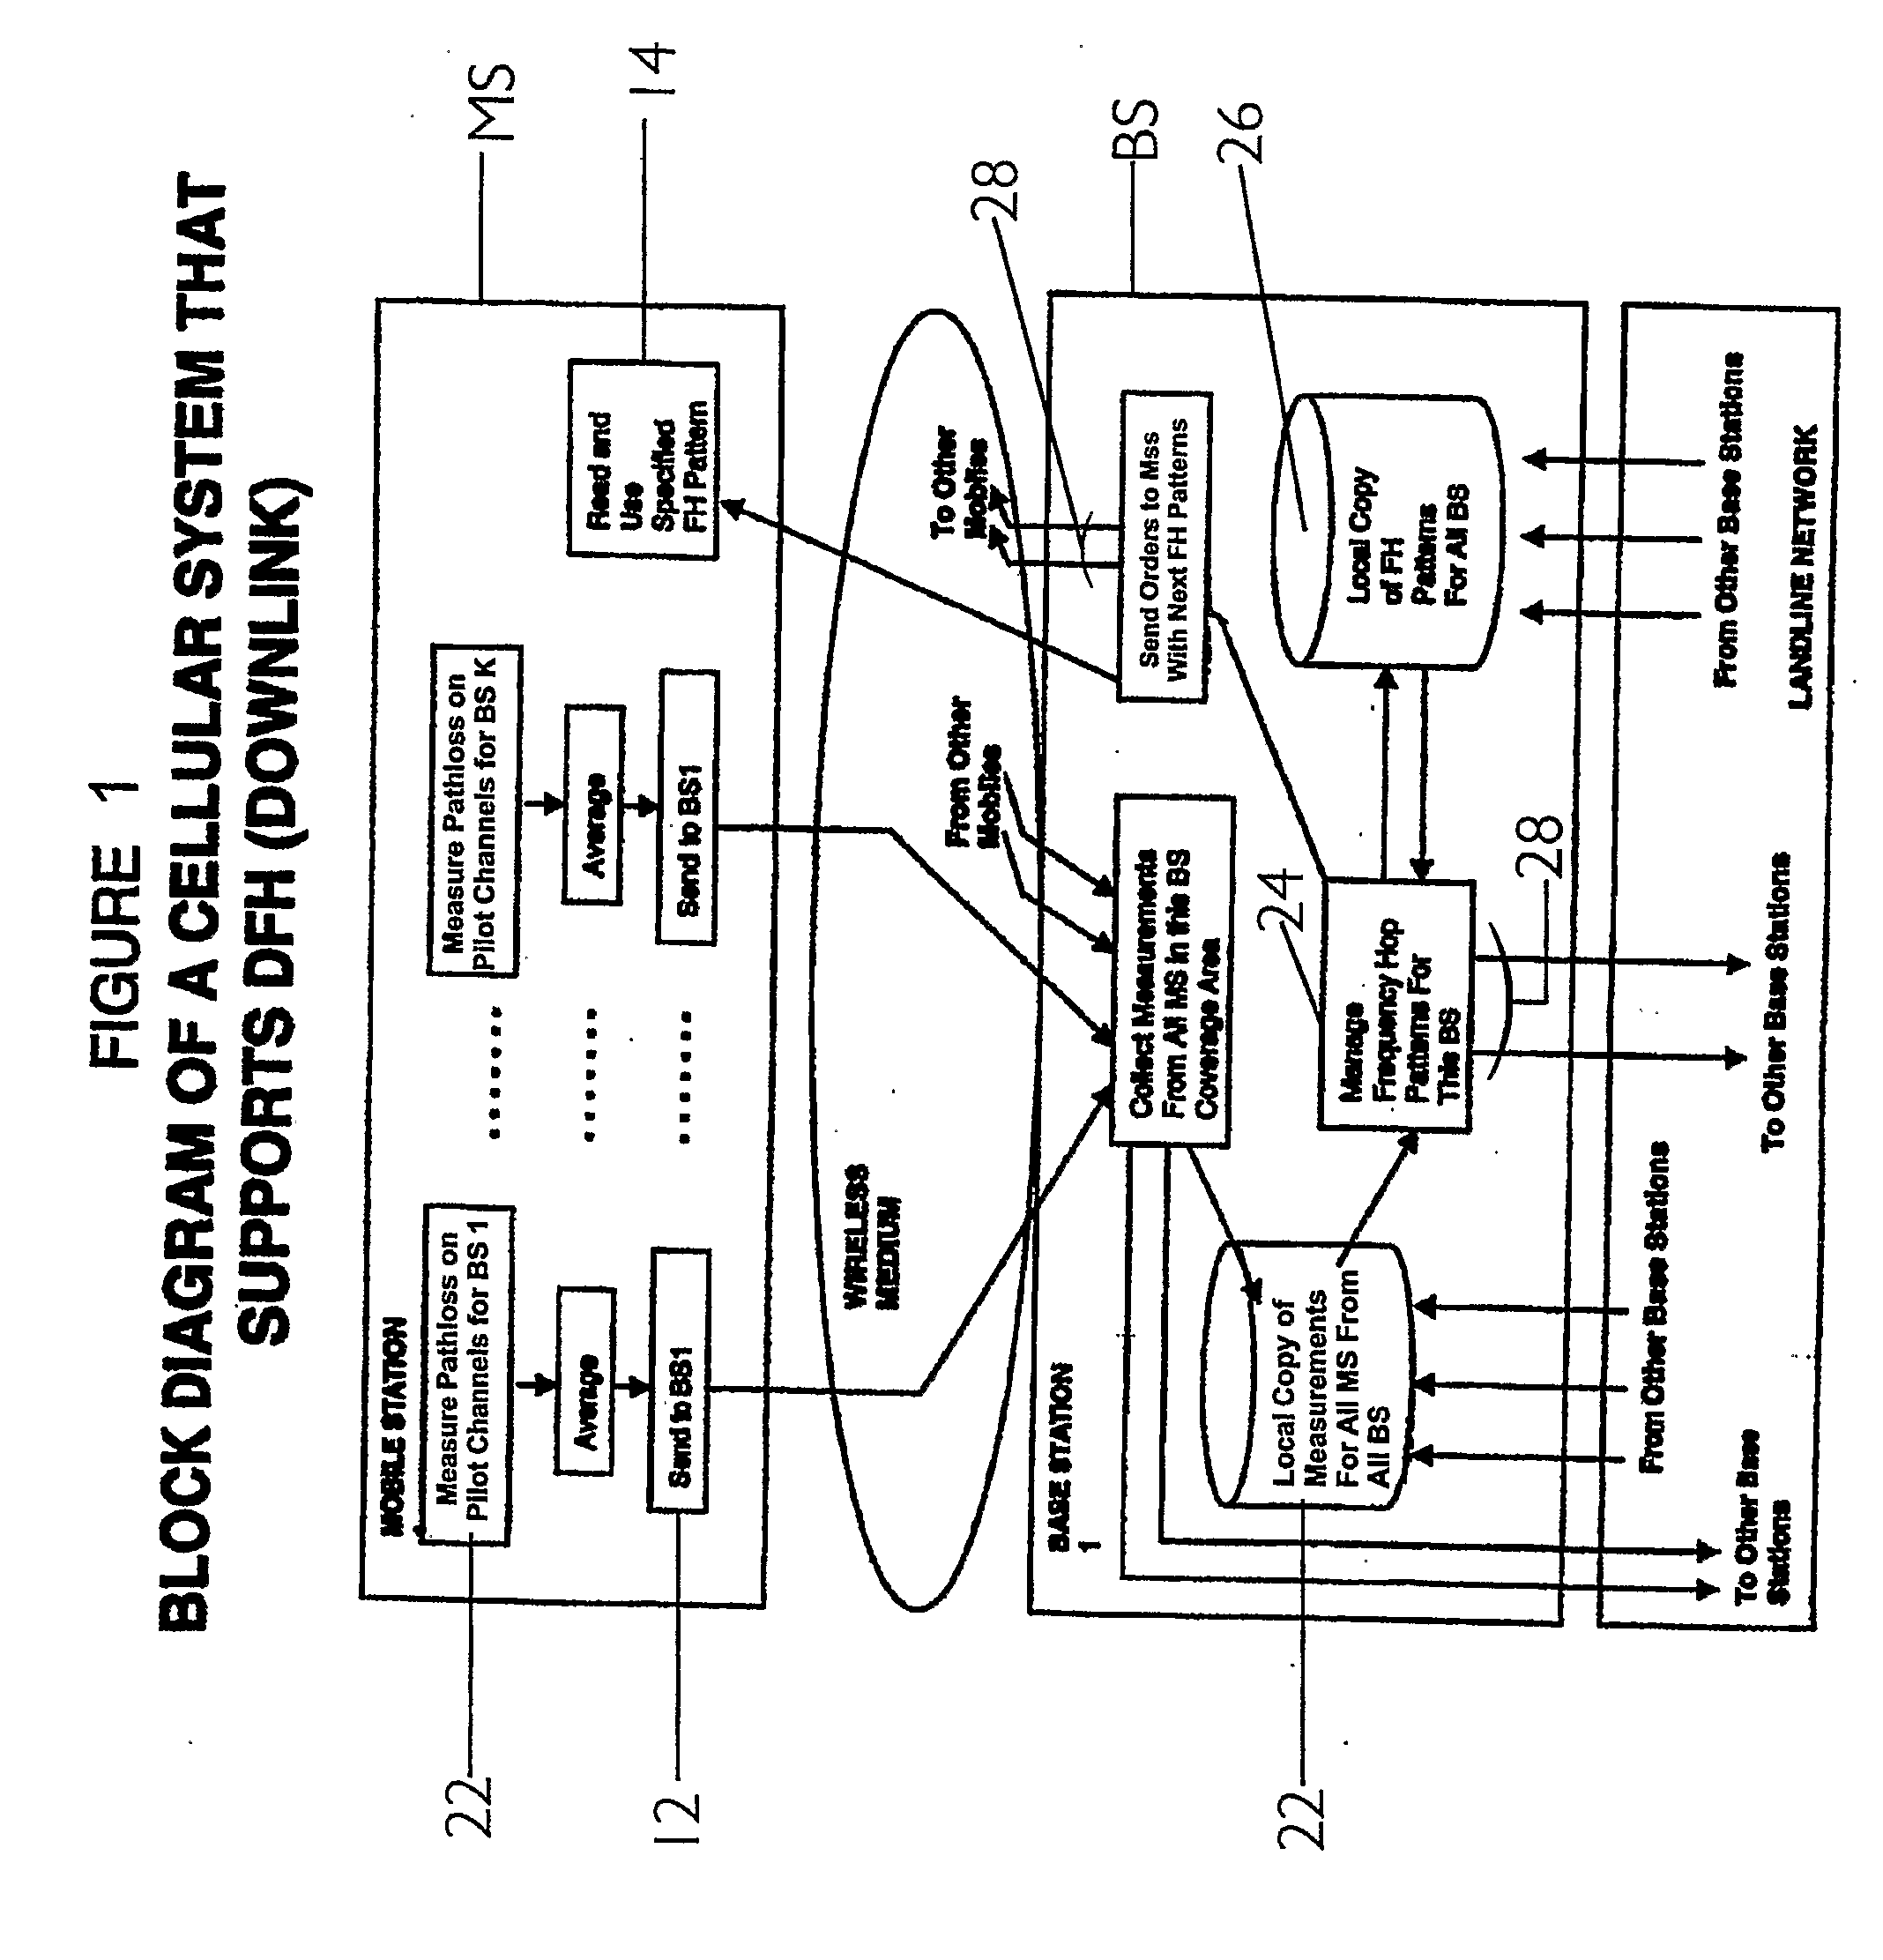 Method and System for Capacity and Coverage Enhancement in Wireless Networks With Relays